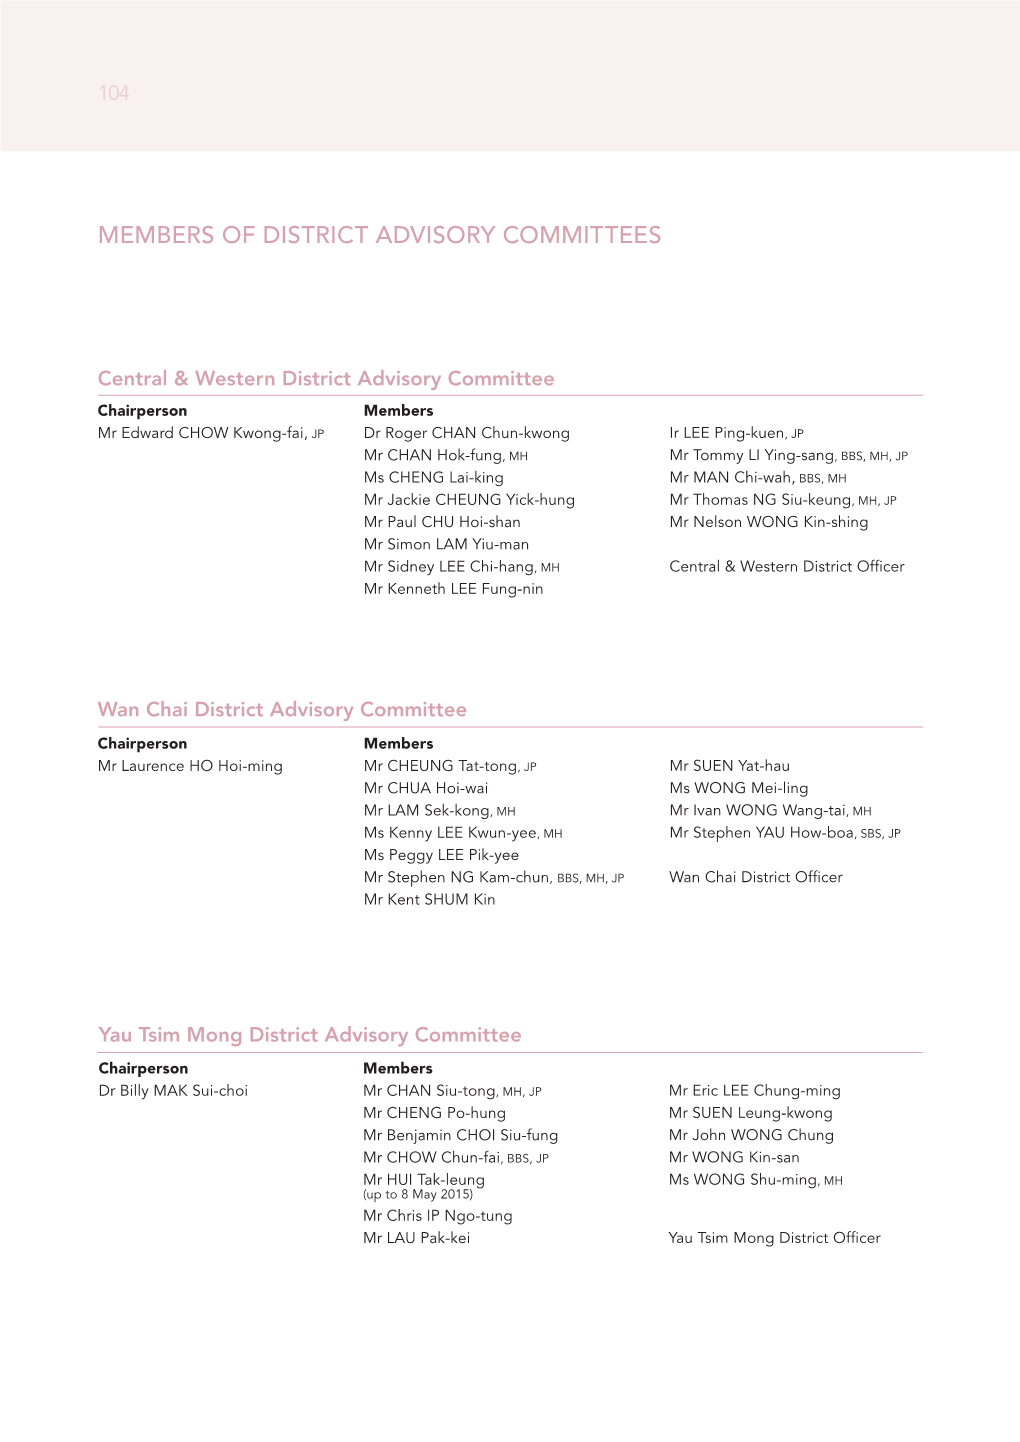 Members of District Advisory Committees